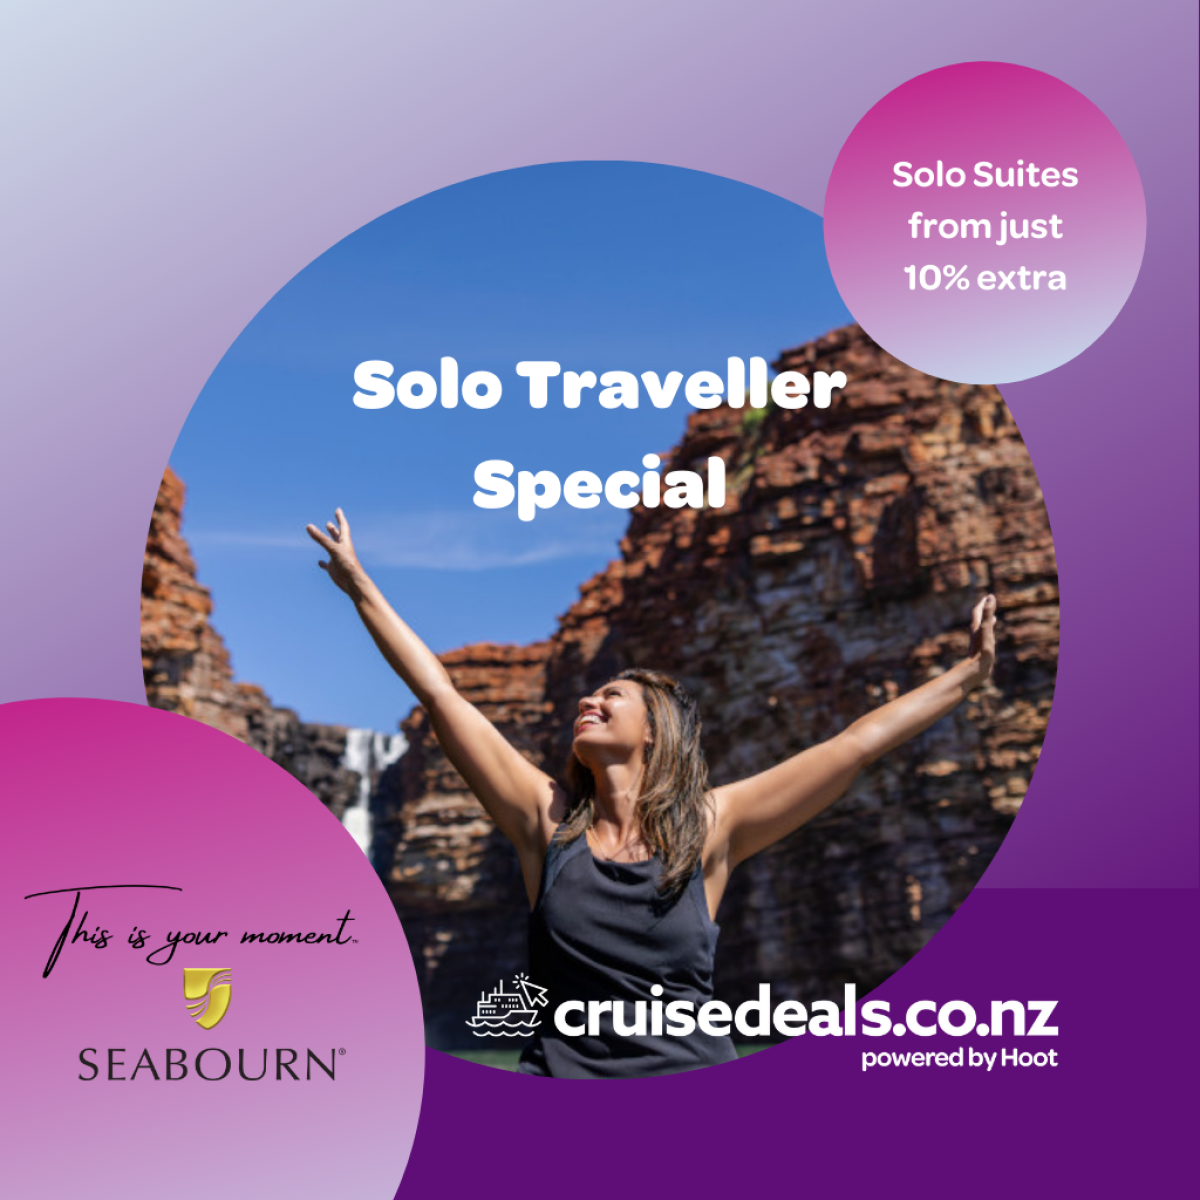 Seabourn Solo Traveller Specials